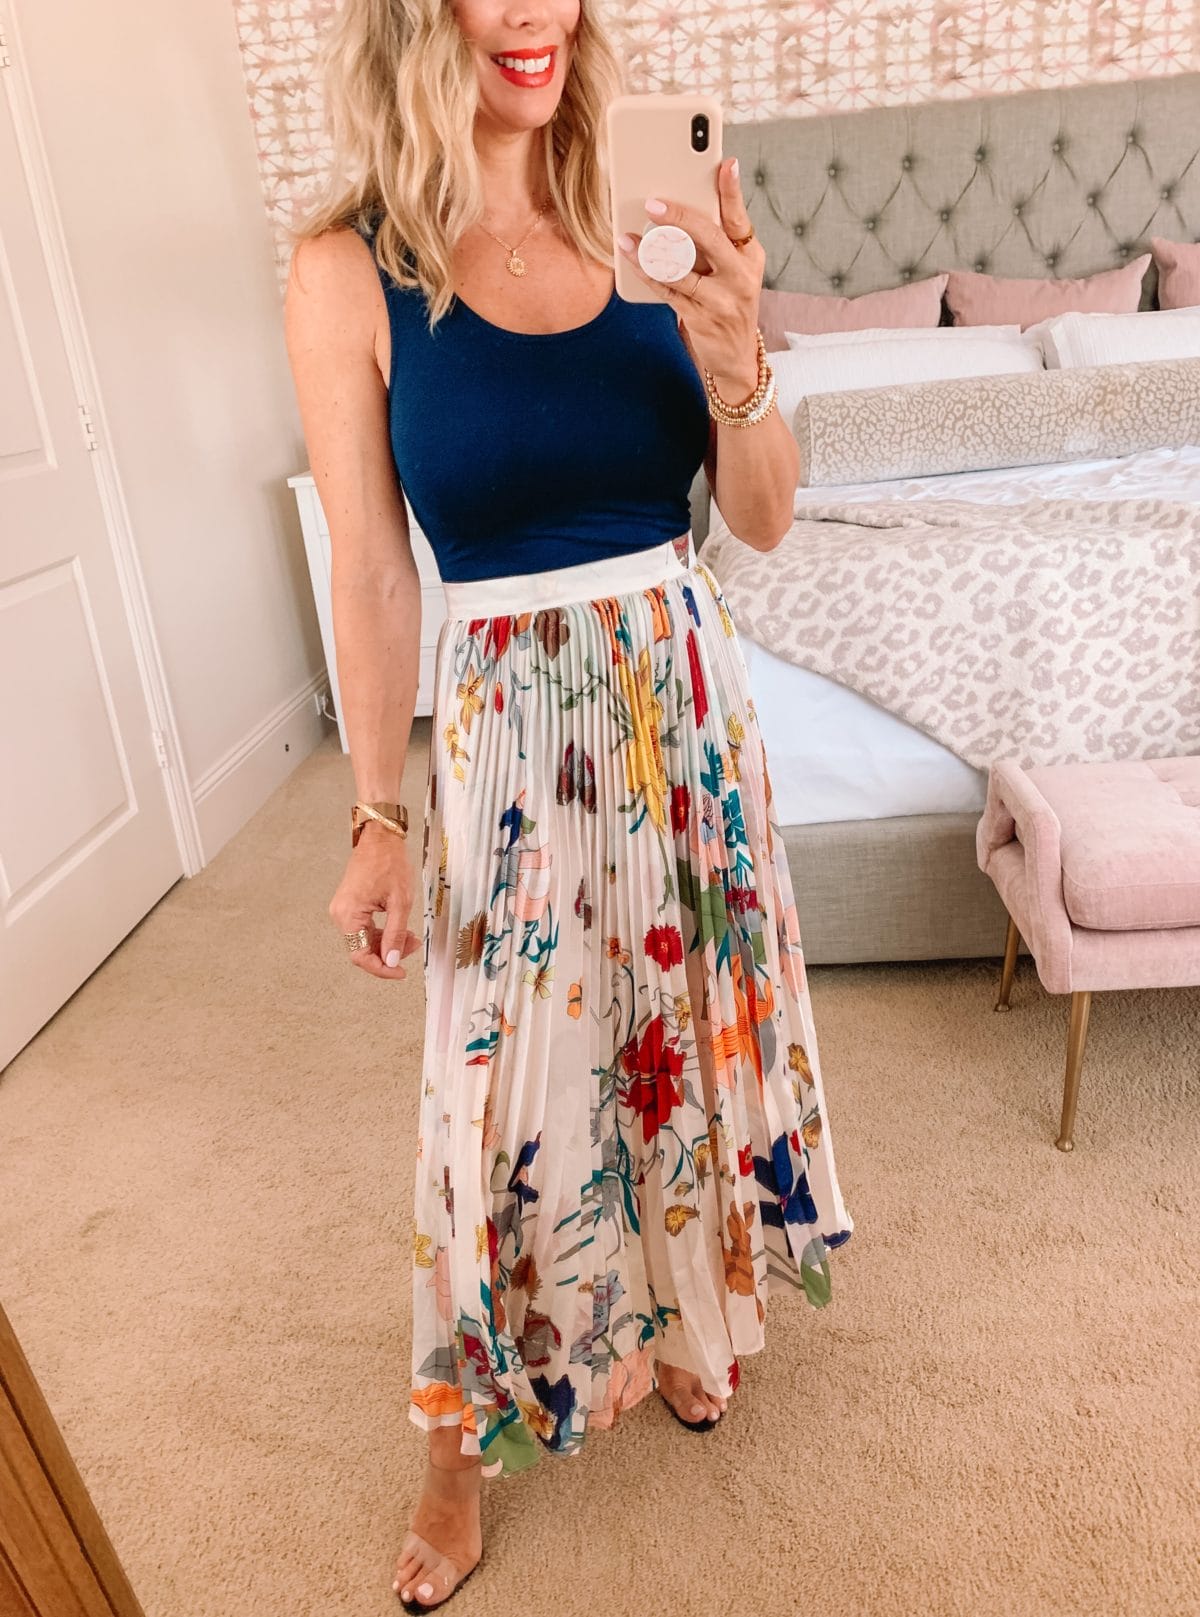 Amazon Fashion Faves, Bodysuit and Floral Skirt with Clear Sandals 